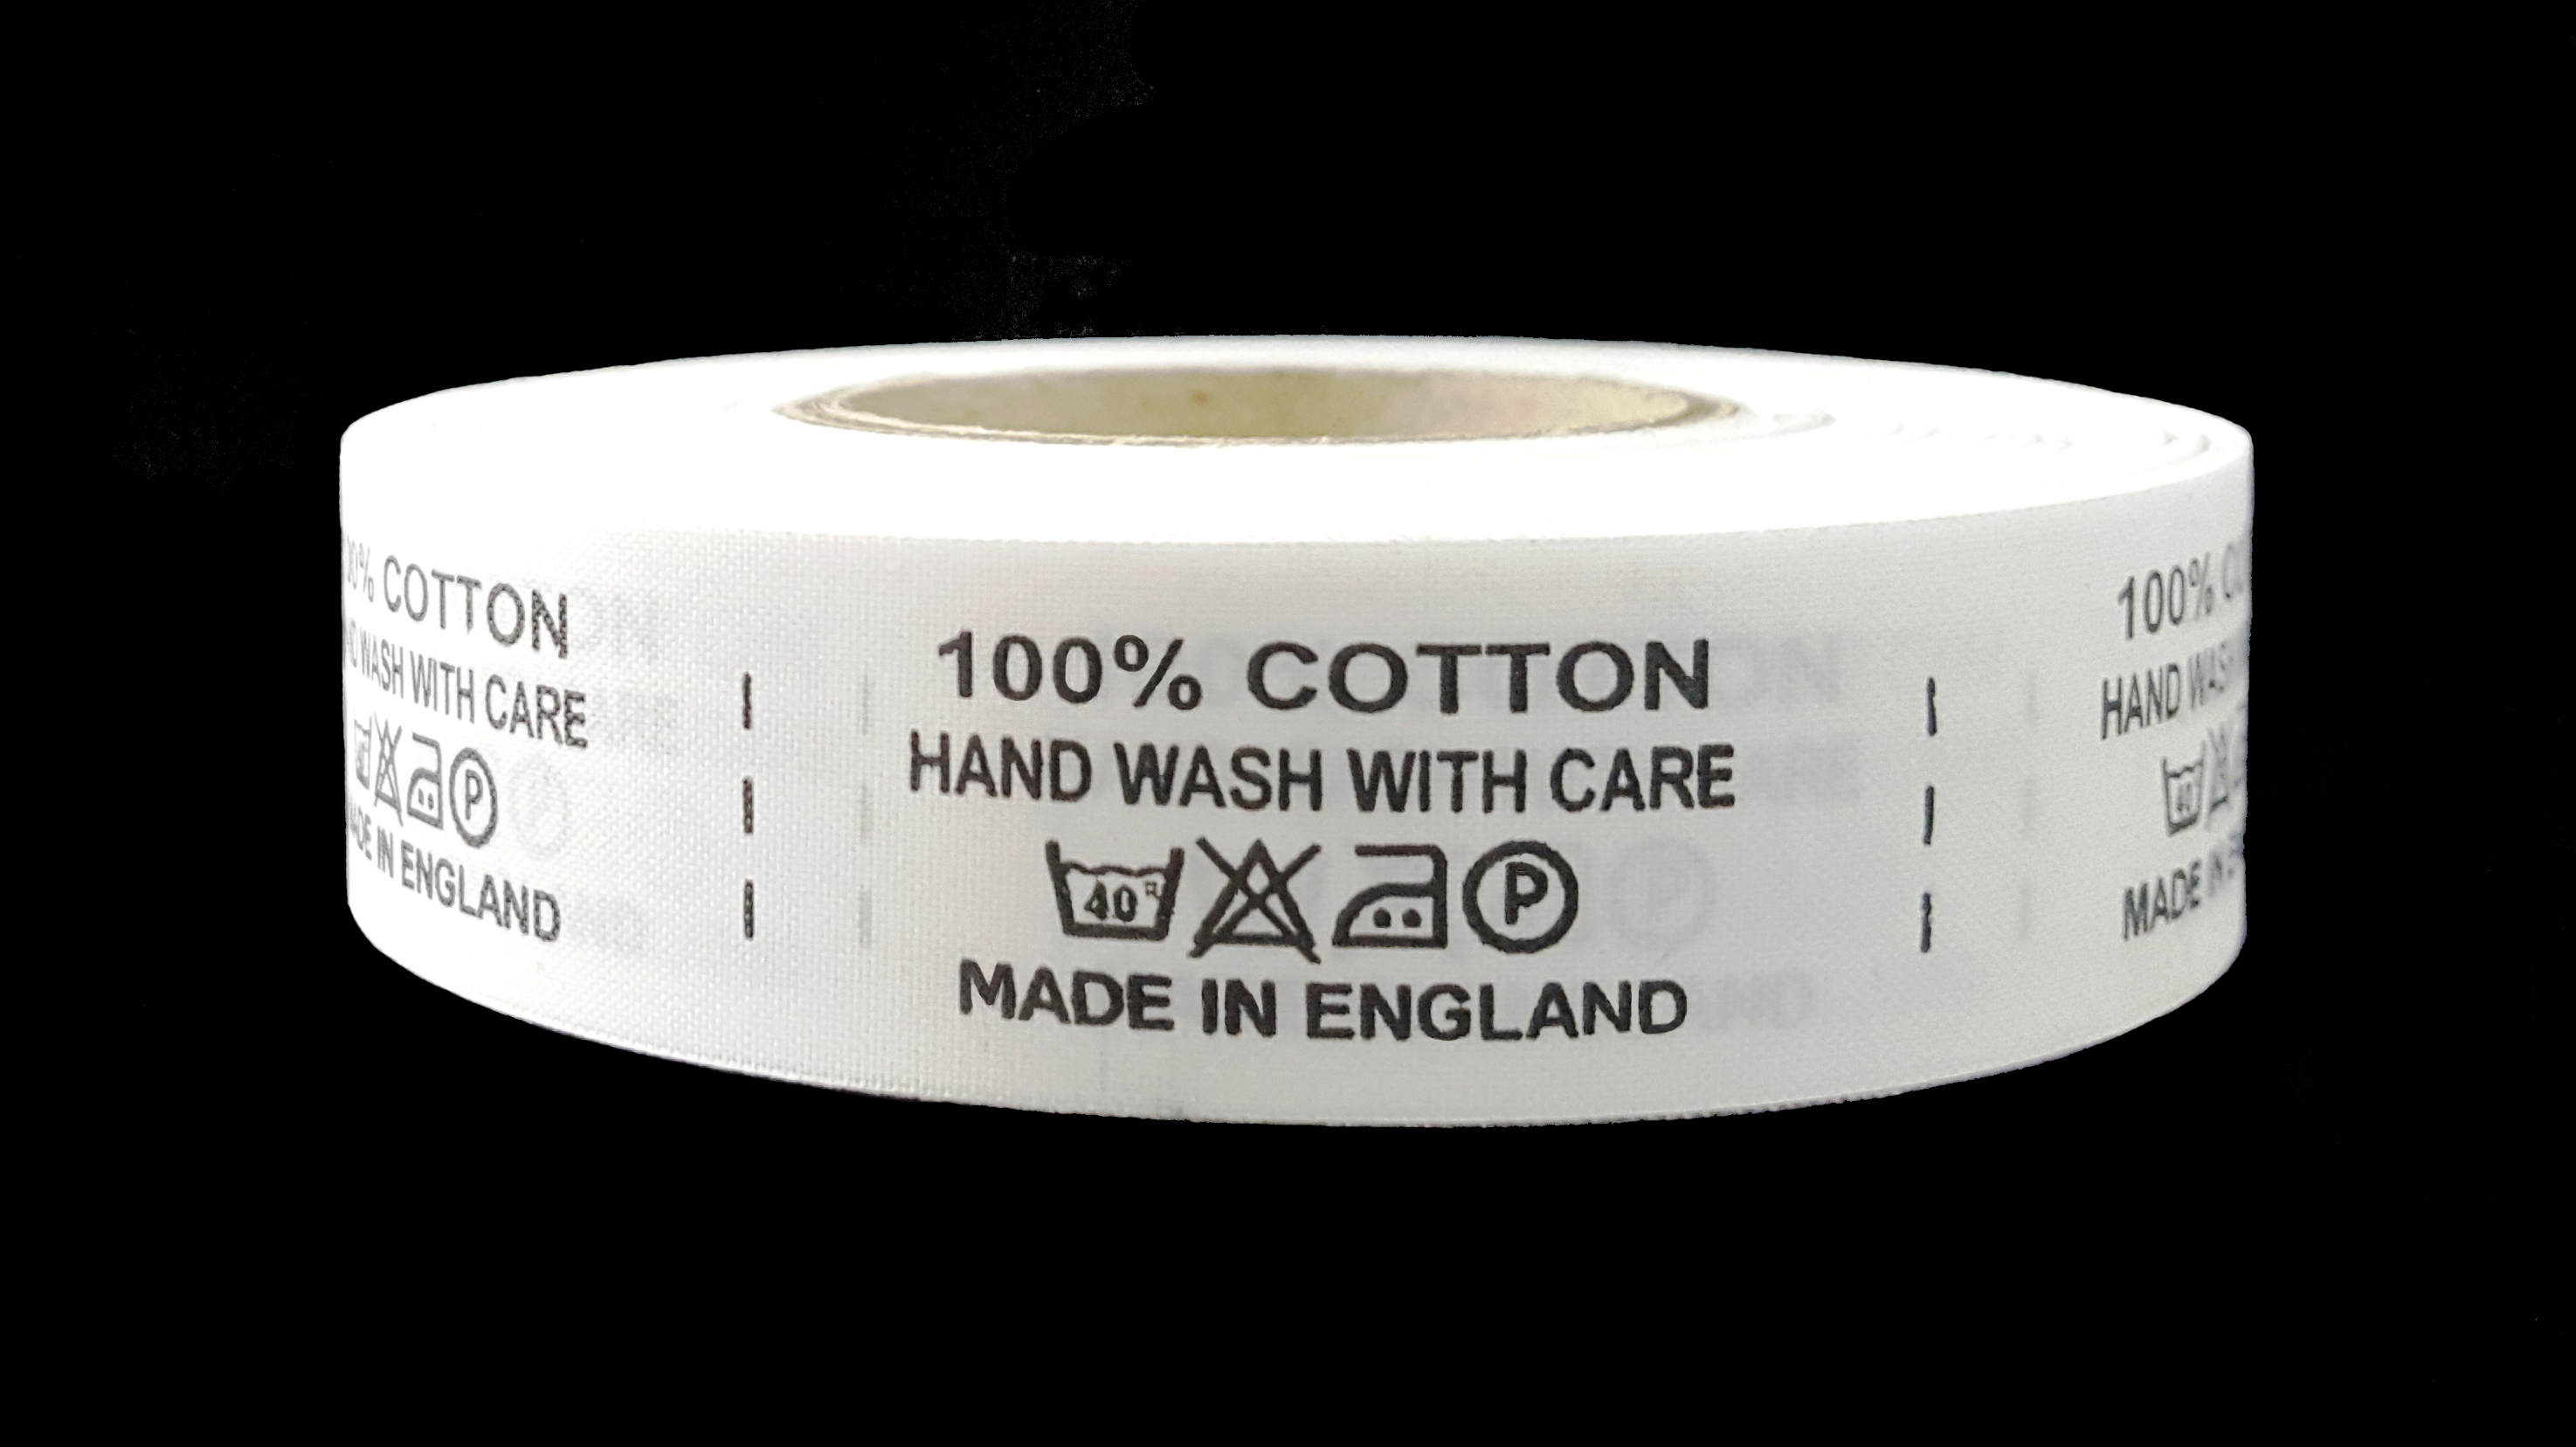 100% COTTON HAND WASH WITH CARE, CARE LABELS